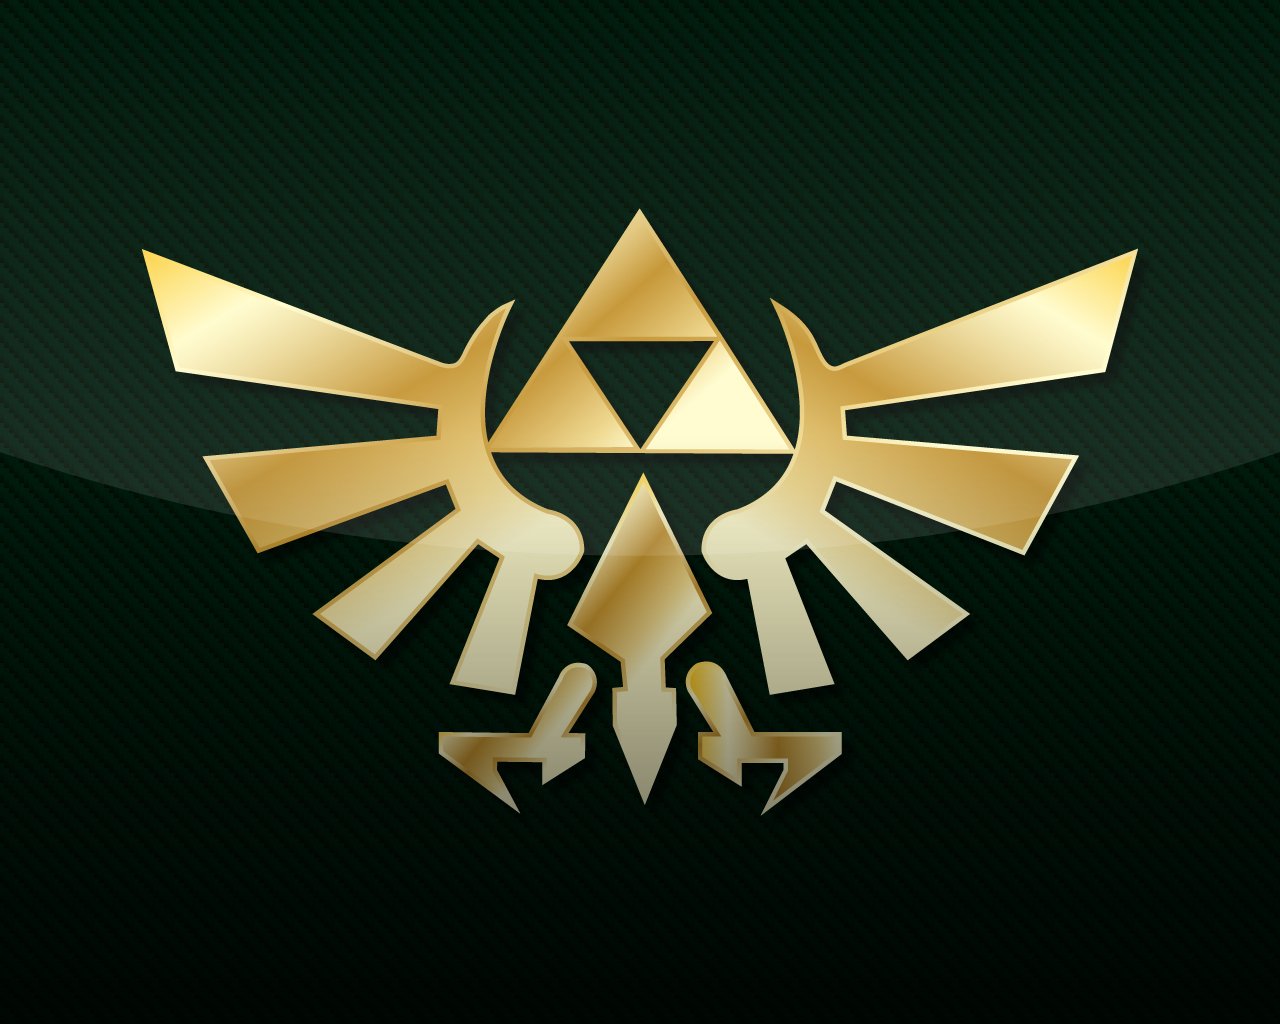 The Legend Of Zelda Image - ID: 464047 - Image Abyss